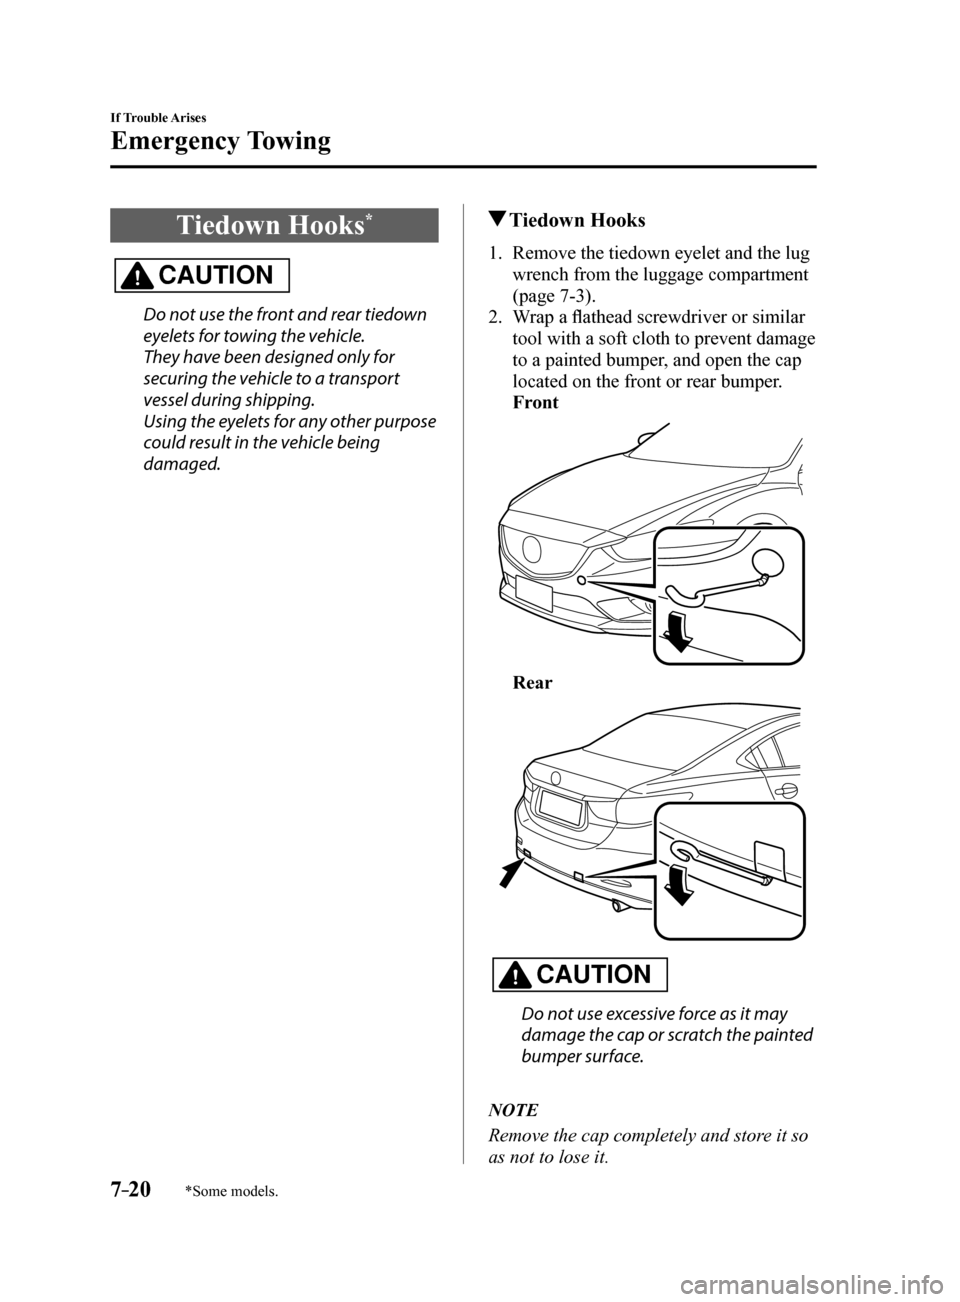 MAZDA MODEL 6 2017   (in English) User Guide 7–20
If Trouble Arises
Emergency Towing
*Some models.
Tiedown Hooks*
CAUTION
Do not use the front and rear tiedown 
eyelets for towing the vehicle.
They have been designed only for 
securing the veh